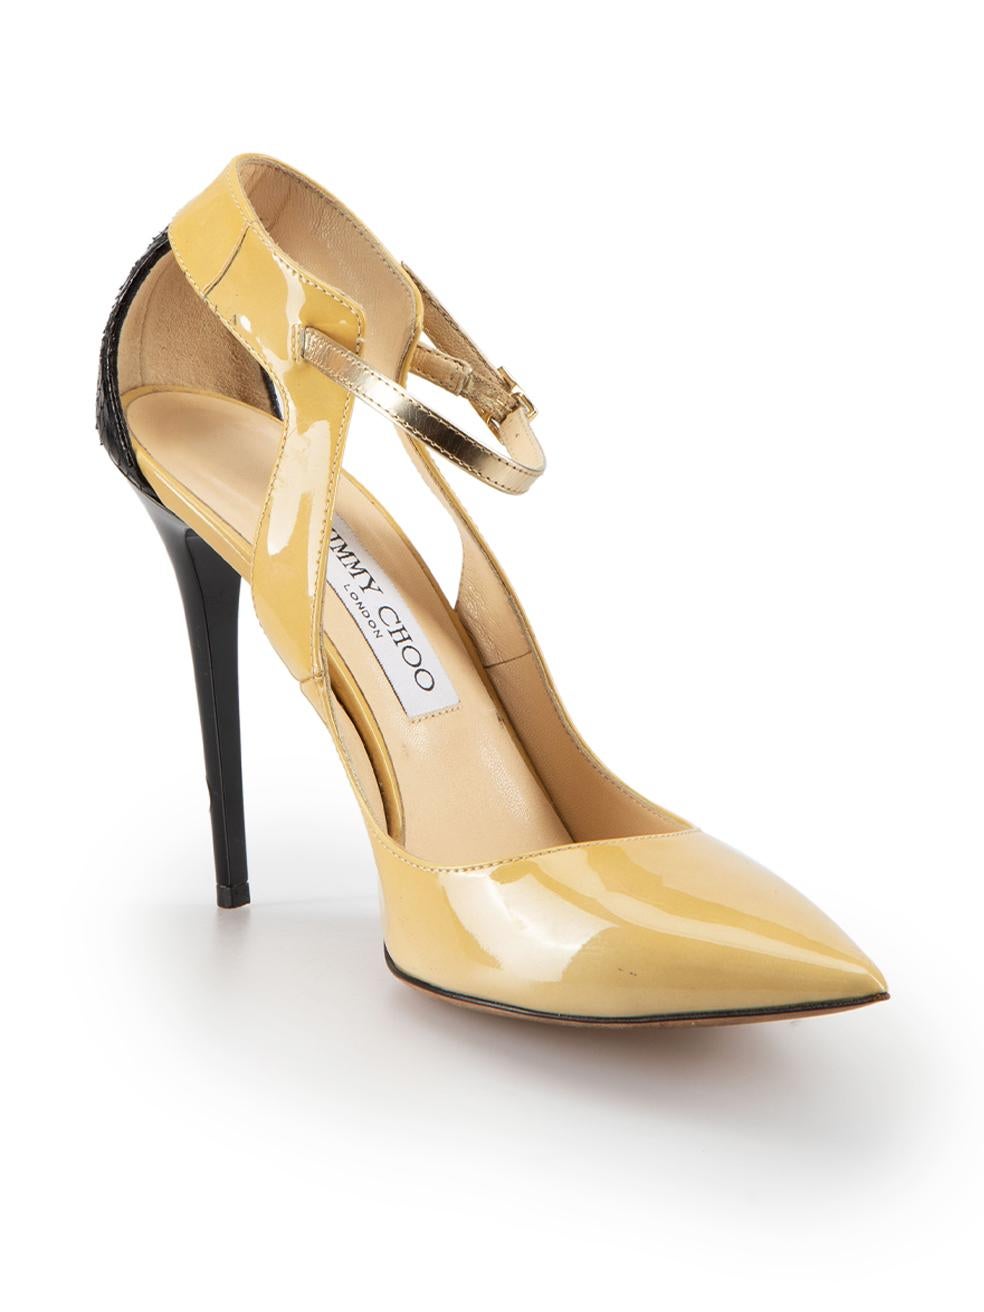 CONDITION is Good. Minor wear to shoes is evident. Light wear to the patent leather panels with dark marks and both heels have indents on this used Jimmy Choo designer resale item.



Details


Beige

Patent leather

Heels

Black snakeskin back